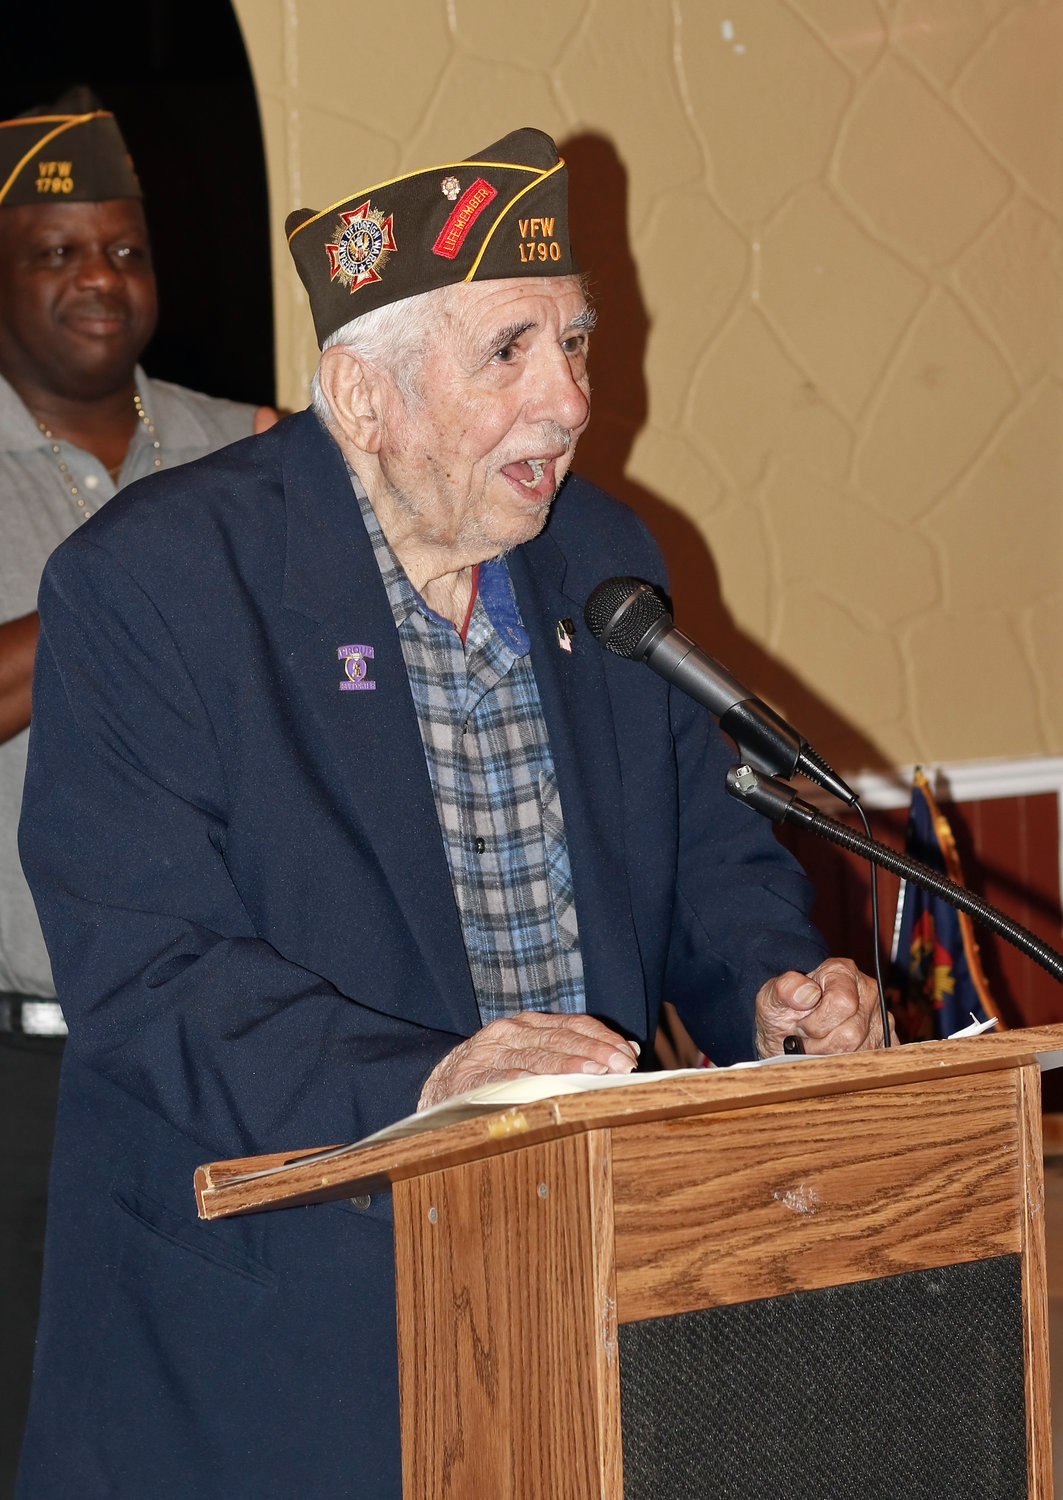 Palermo speaking at the rededication of VFW Post 1790 in honor of former Commander Joseph Marando Jr. in 2019.